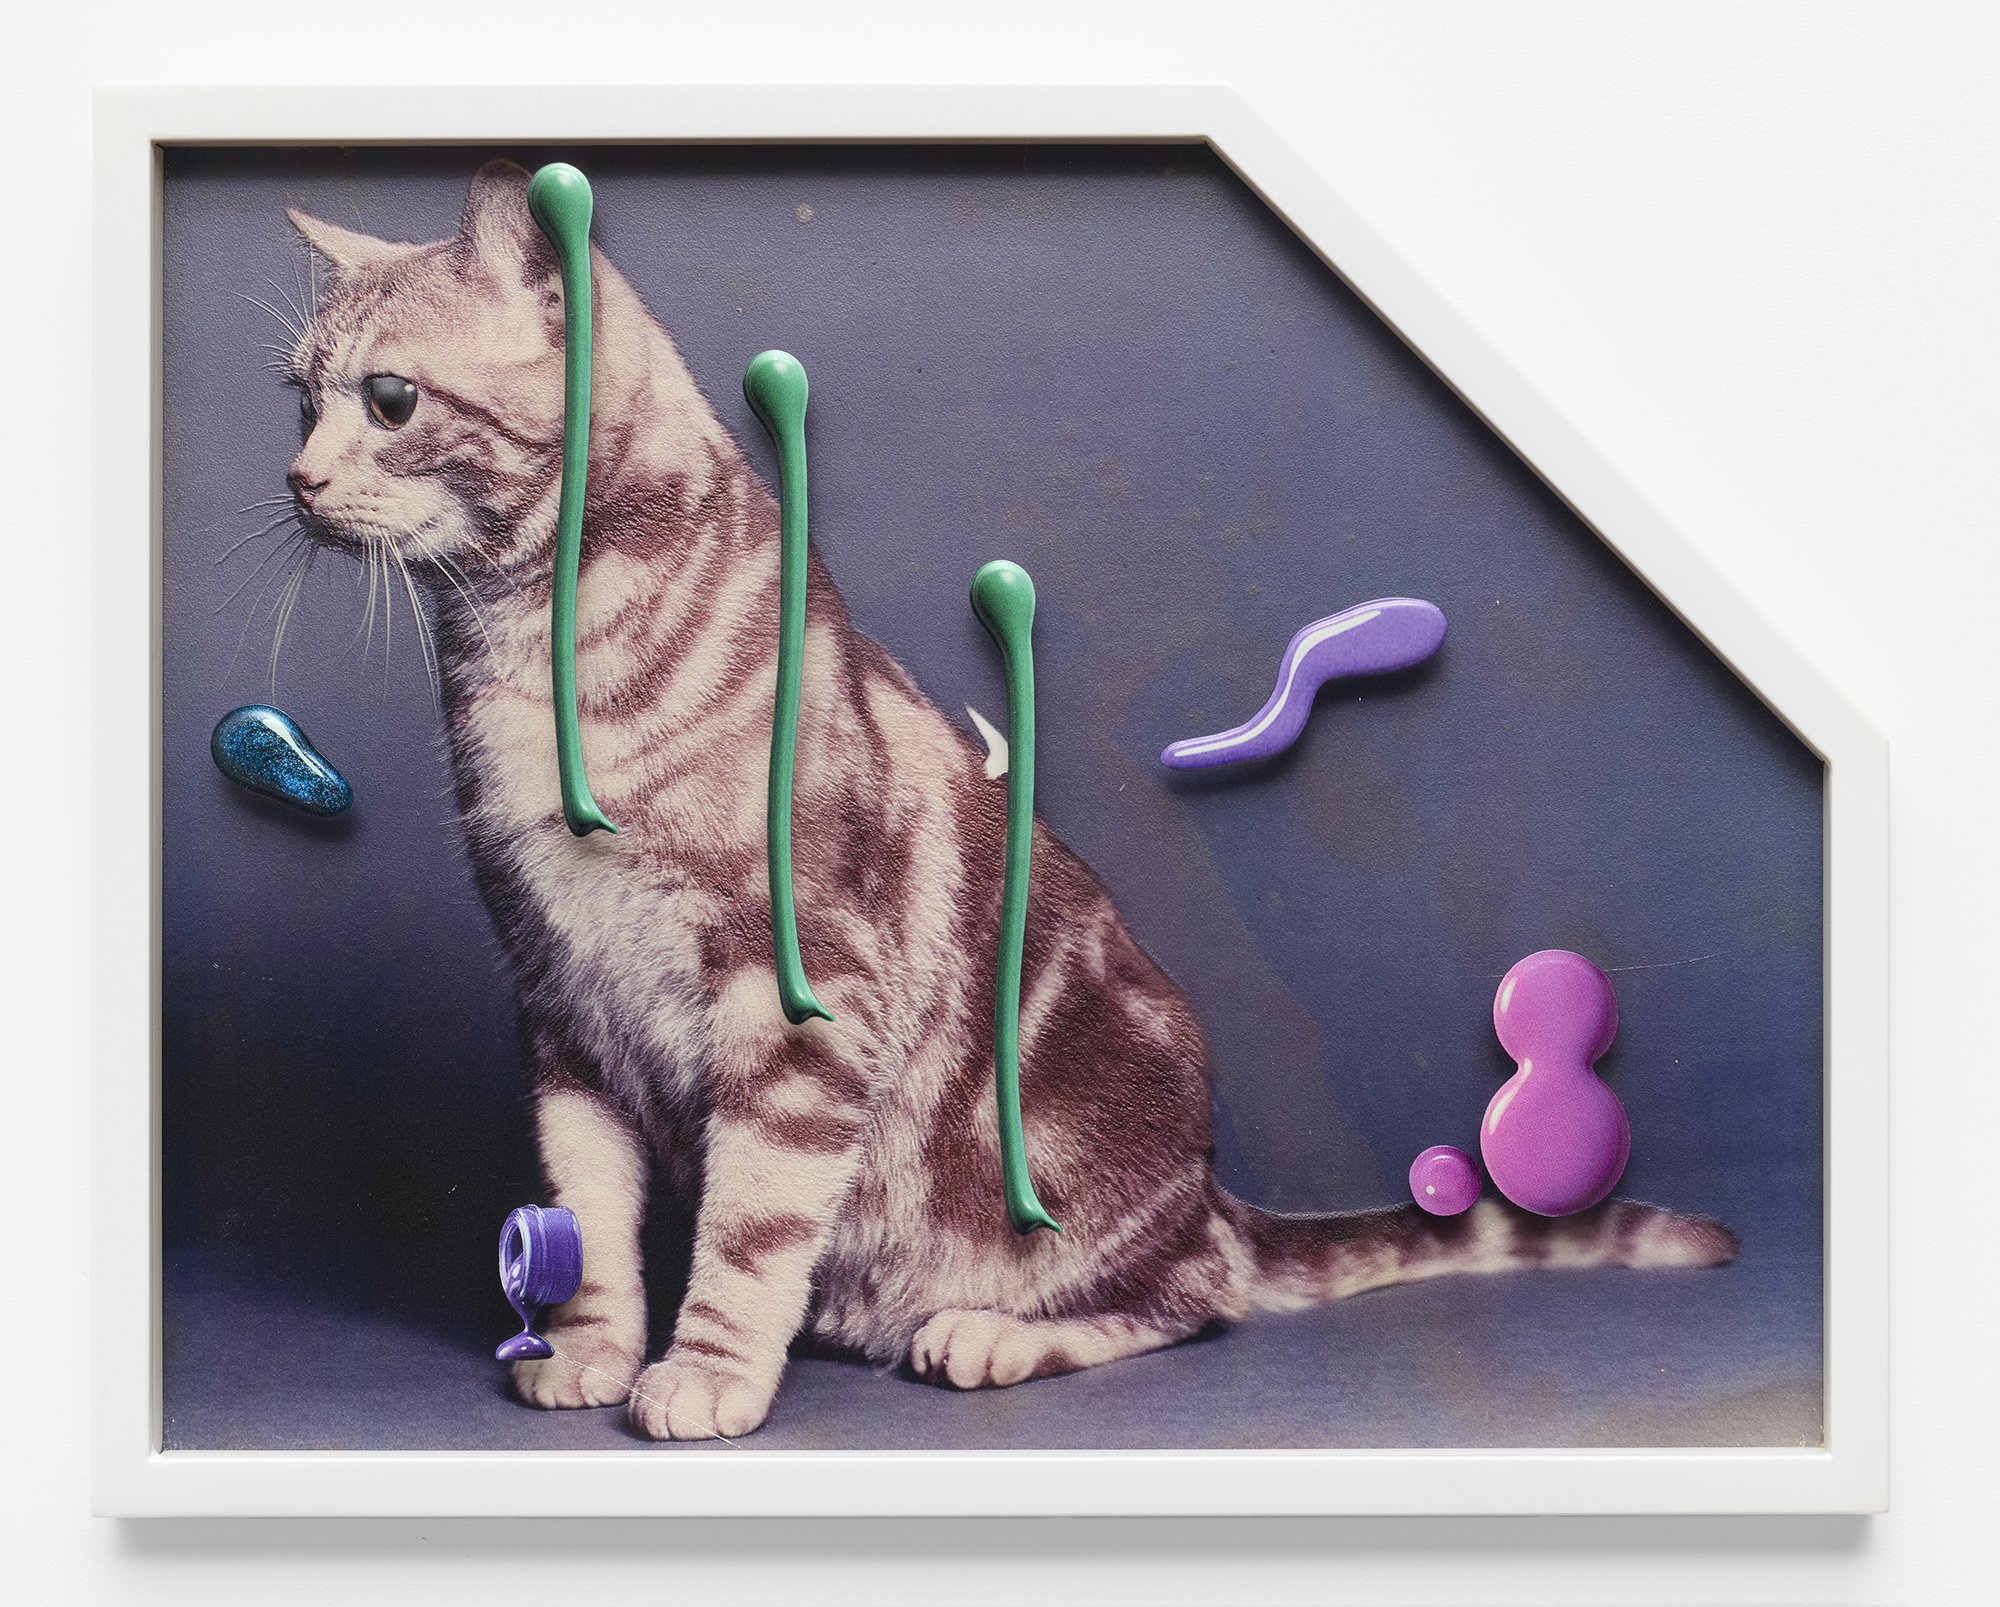   Teppei Kaneuji   Sea and Pus (Photograph of Cat) #12 , 2022. UV inkjet print (StareReap 2.5 print) on acrylic board, polycarbonate, 17.5 x 22 inches. Edition 3/7 + 2 AP. 